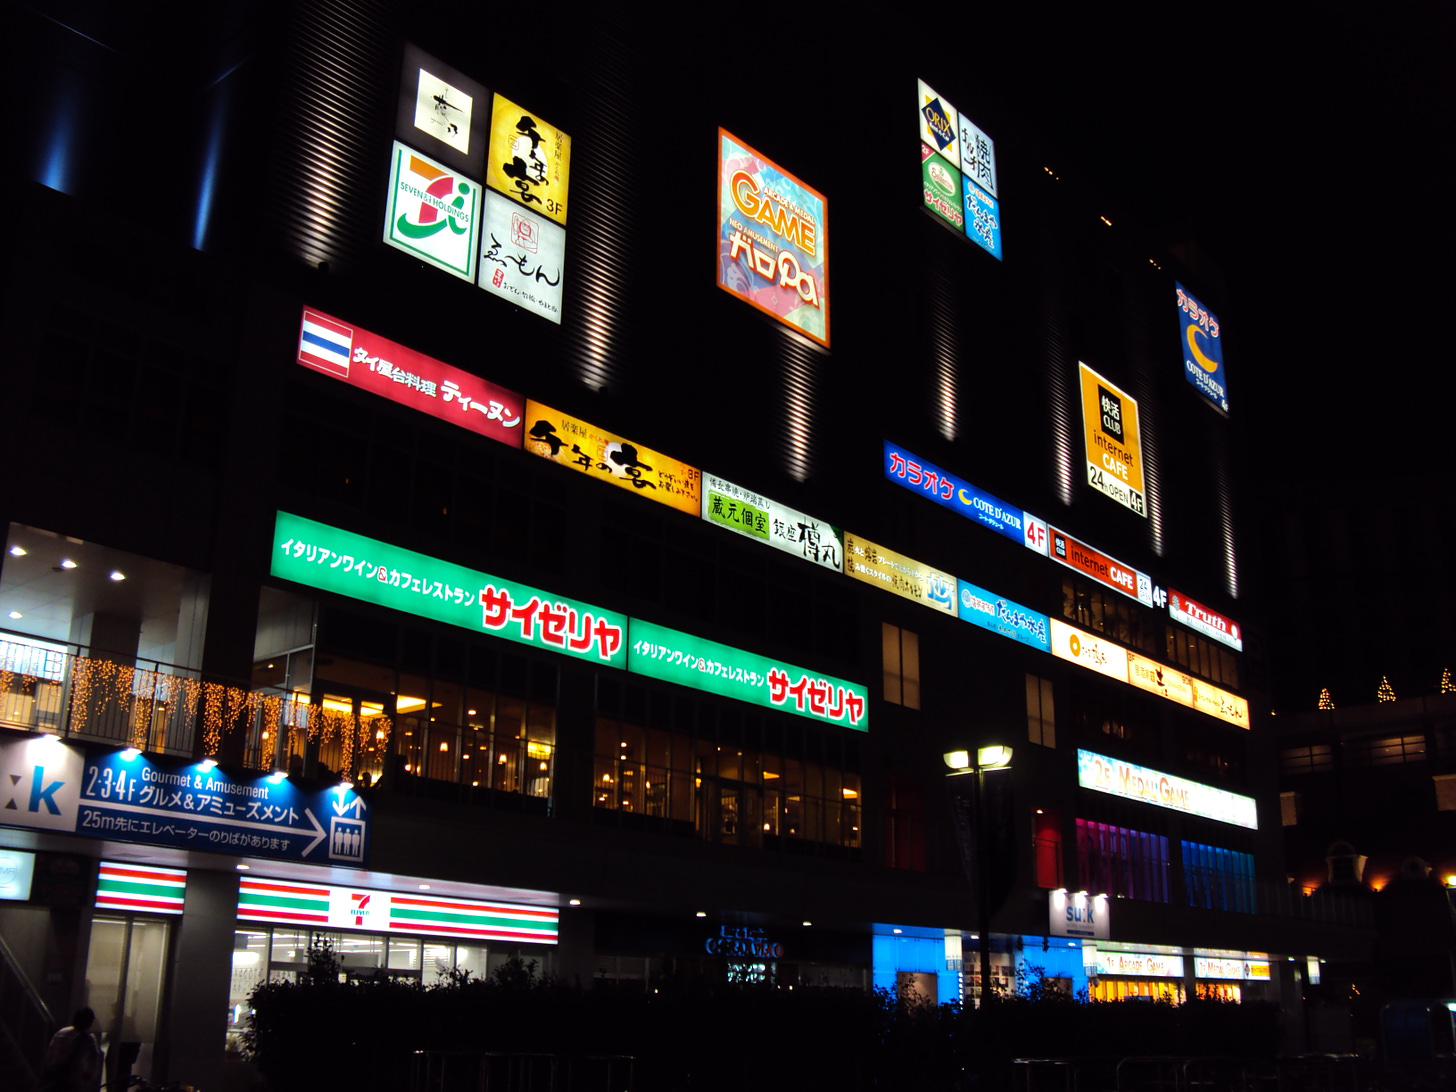 Nighttime image of a building with many brightly lit signs of various shops.